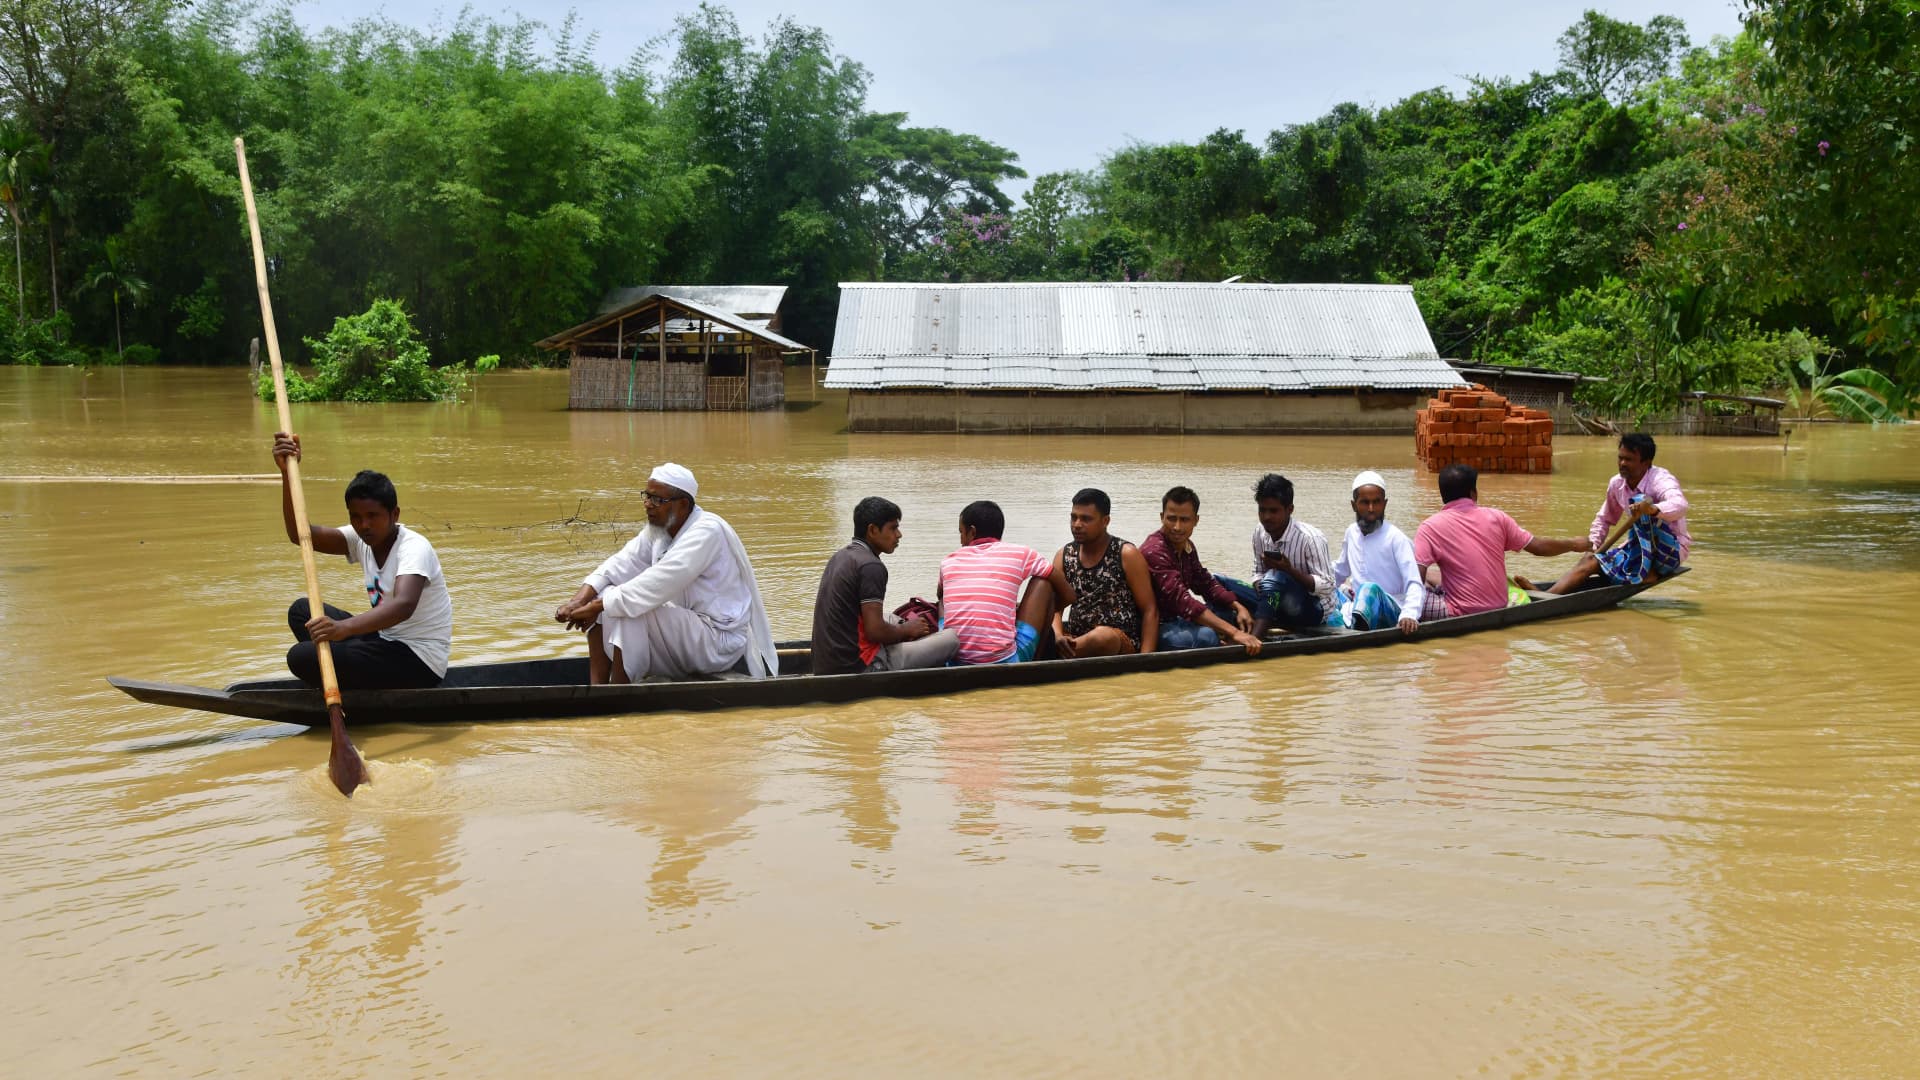 Villagers travel on a boat through a flooded area after heavy rains in Nagaon district, Assam state, on May 19, 2022.